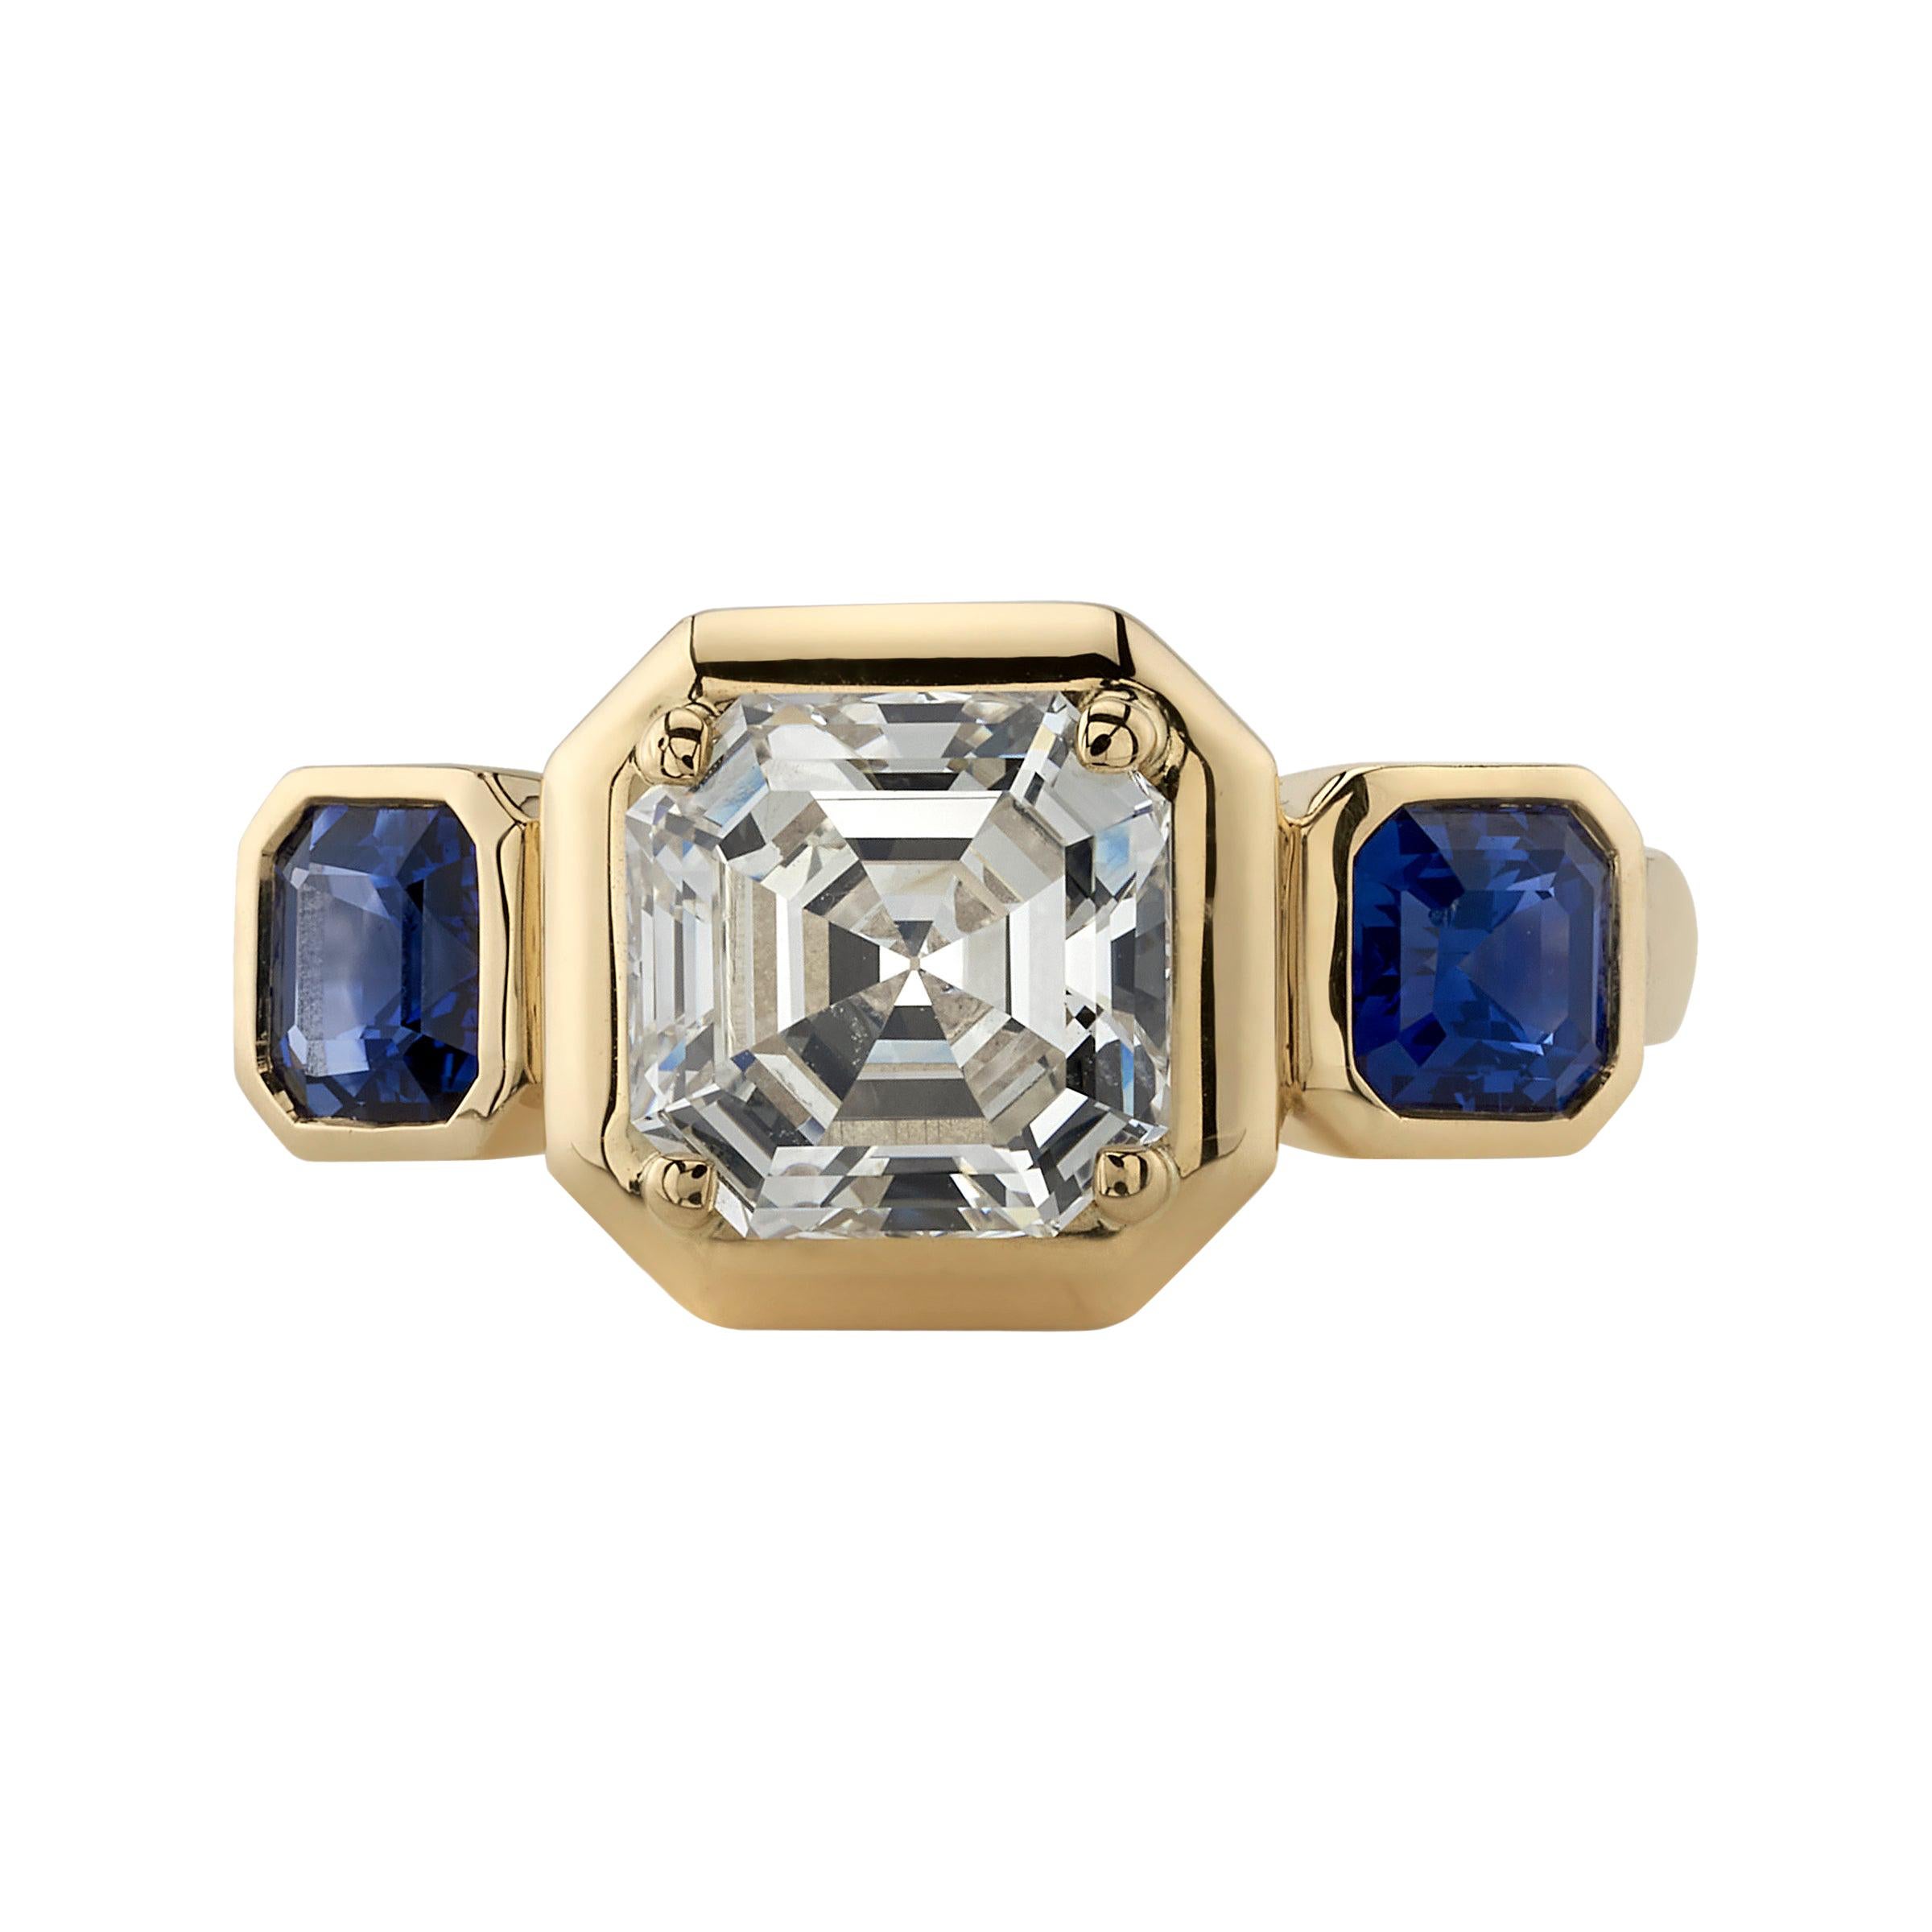 2.05 Carat Asscher Cut Diamond Set in a Handcrafted Three Stone Yellow Gold Ring